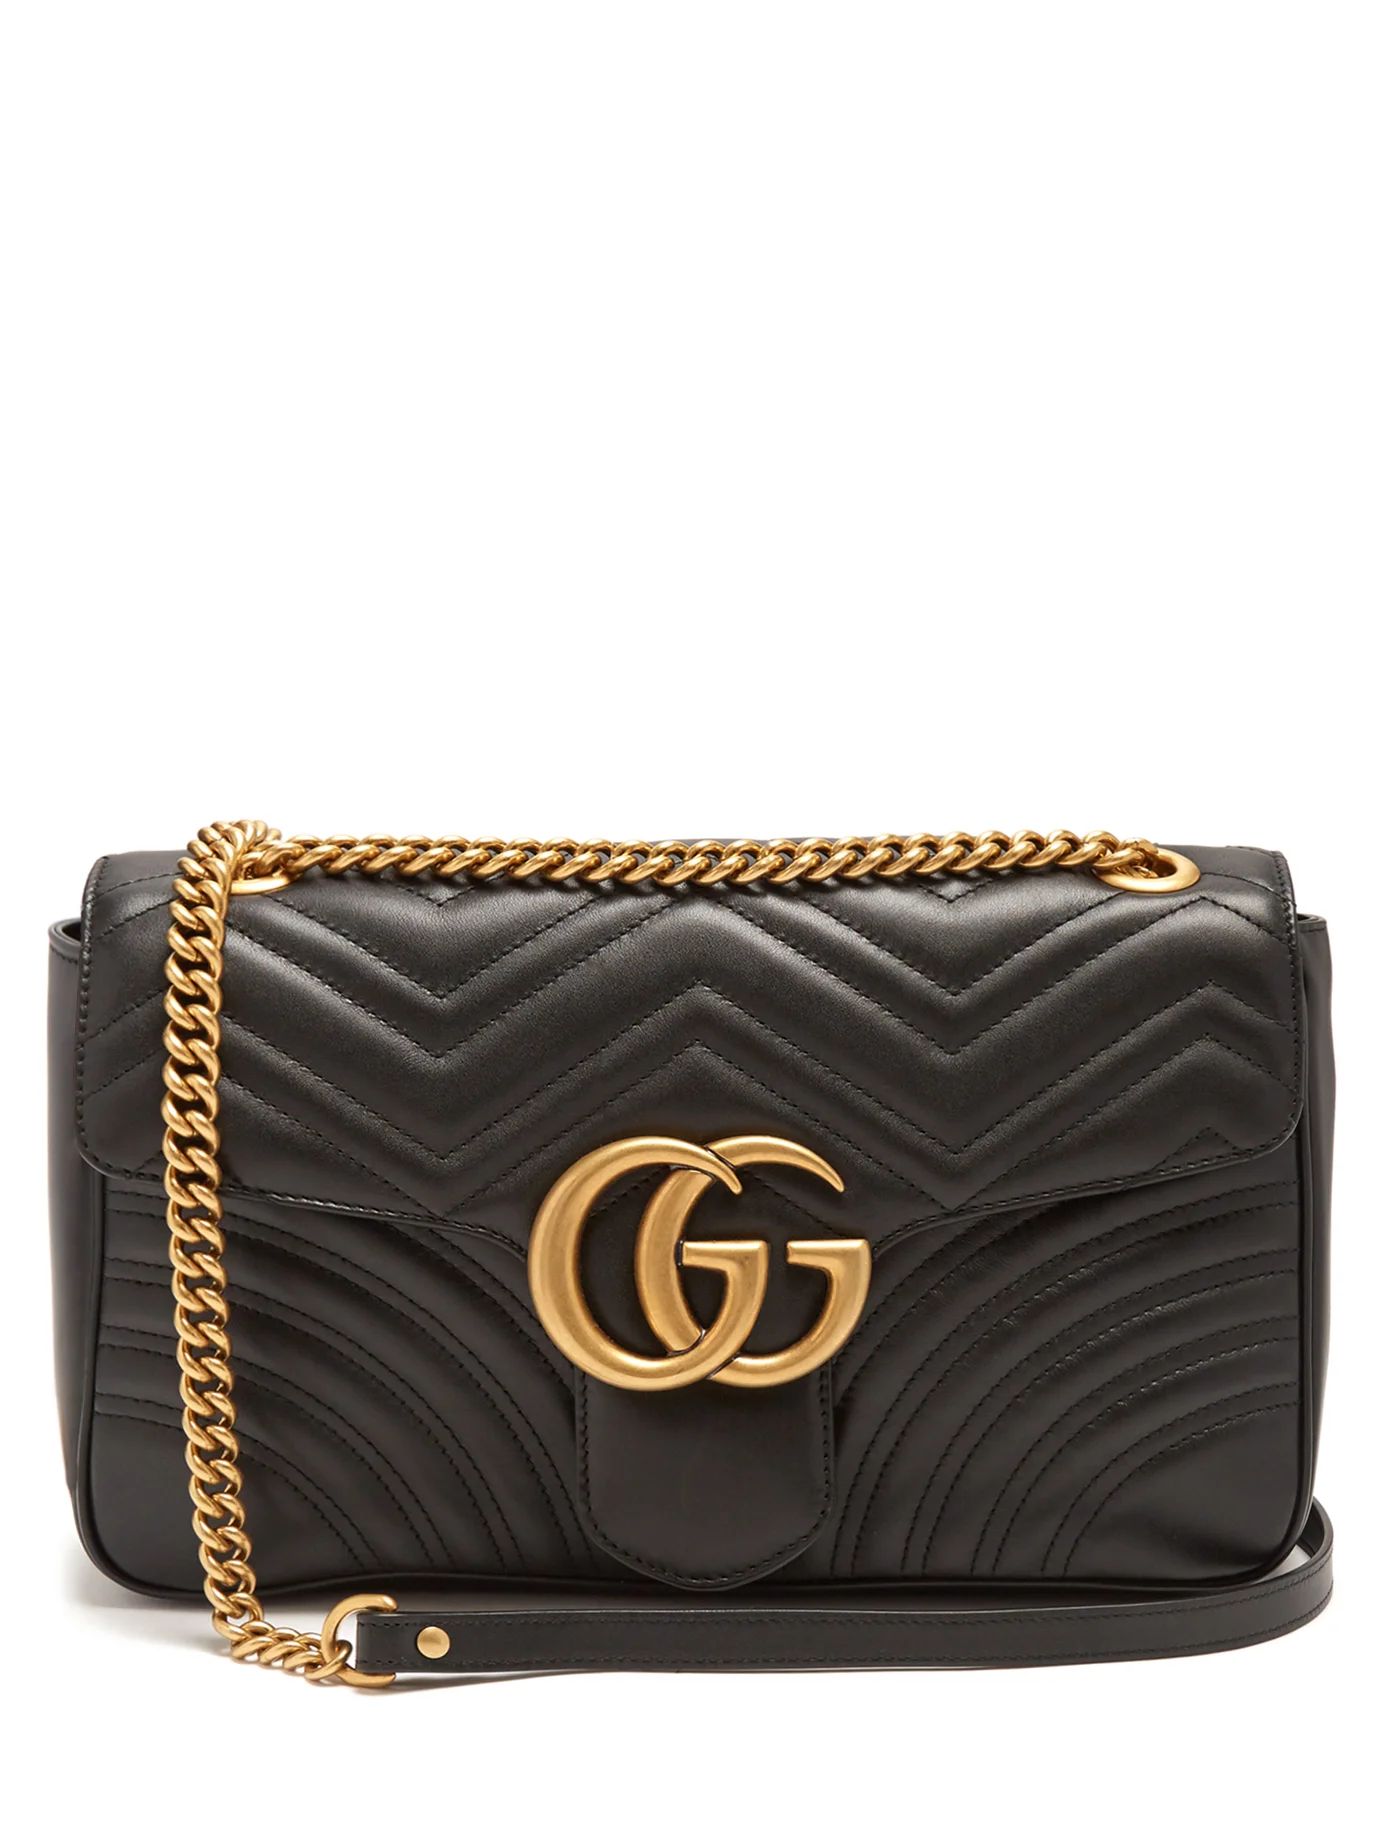 GG Marmont medium quilted-leather shoulder bag | Matches (US)